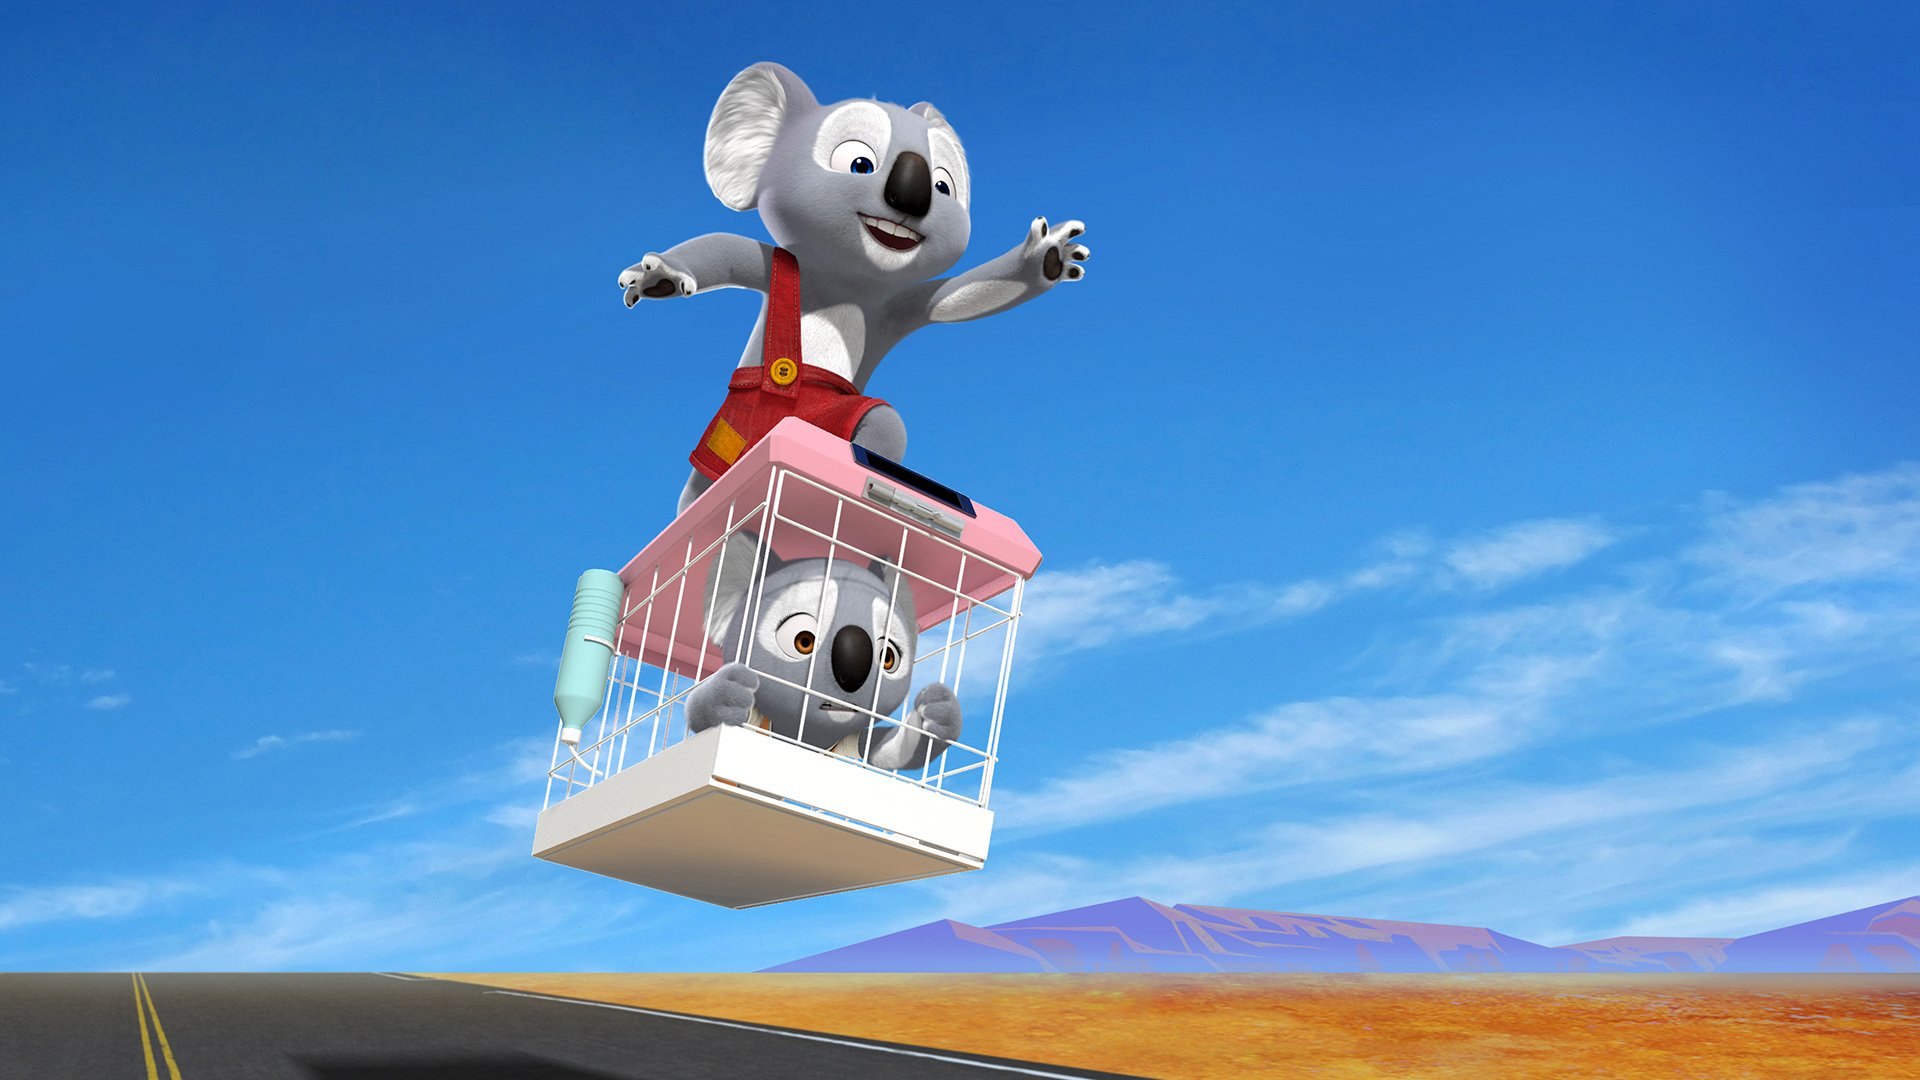 The Adventures Of Blinky Bill. Wallpapers